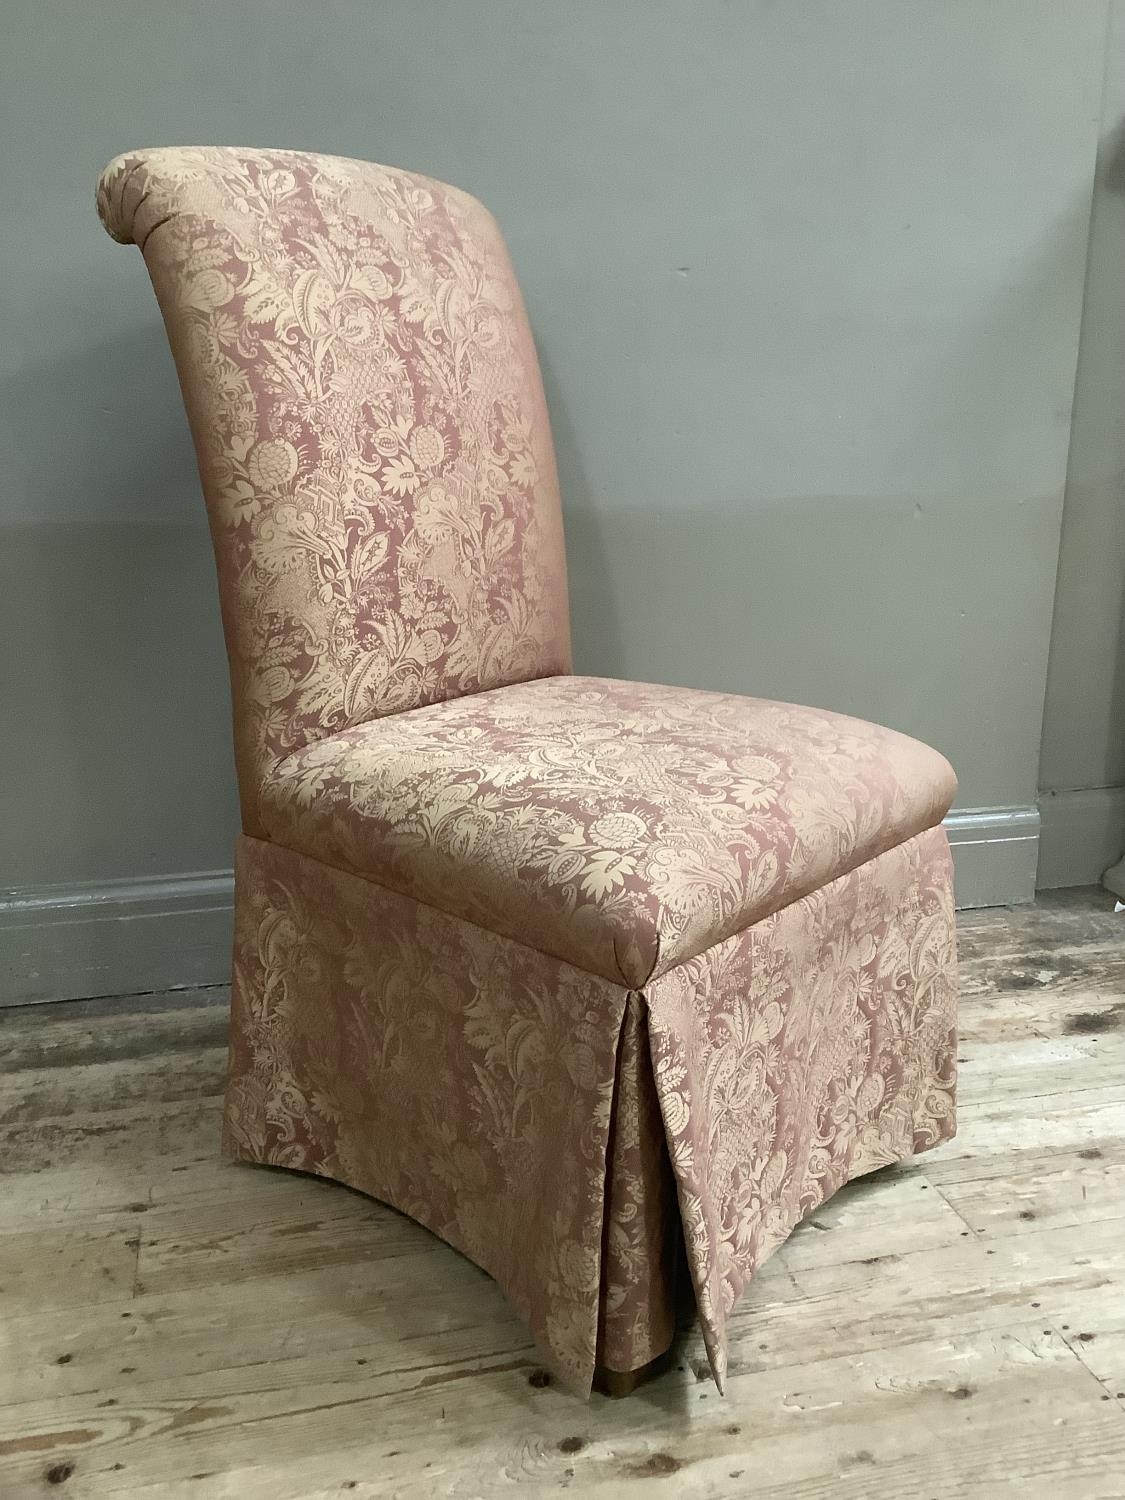 A bedroom chair upholstered in pink and gold fabric with skirt